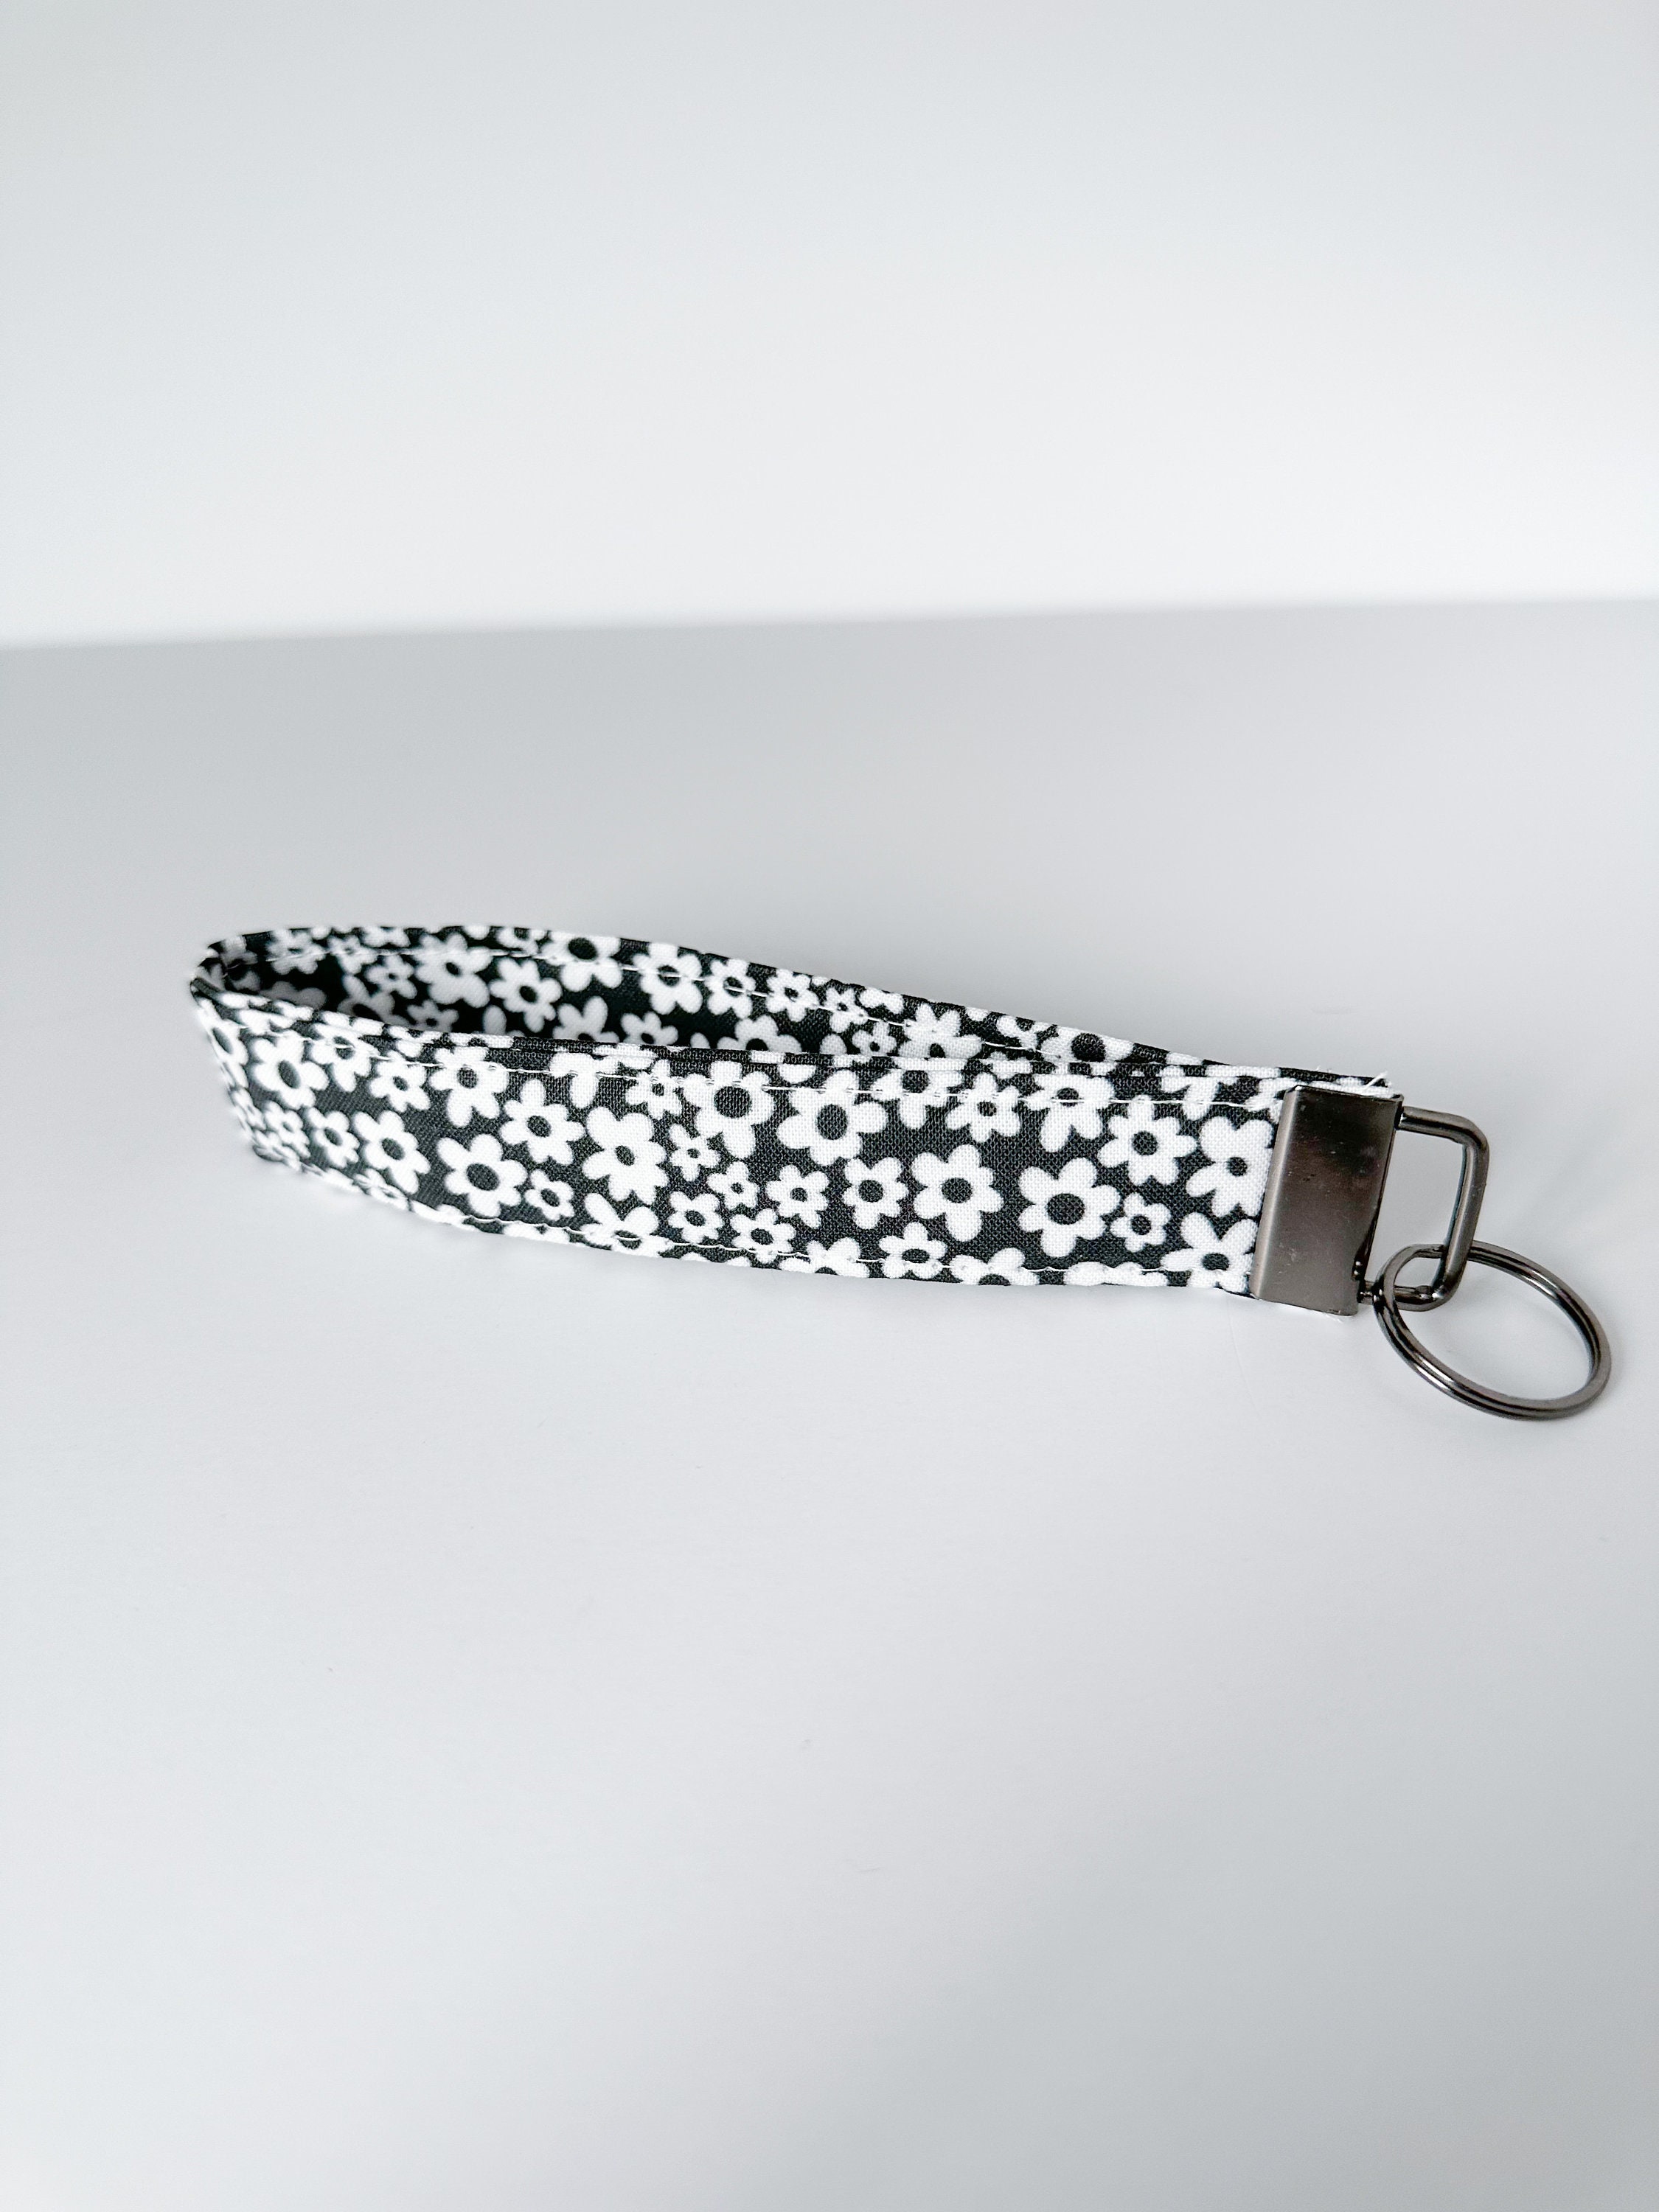  MNGARISTA Wristlet Strap for Key, Hand Wrist Lanyard Key Chain  Holder, Black : Office Products